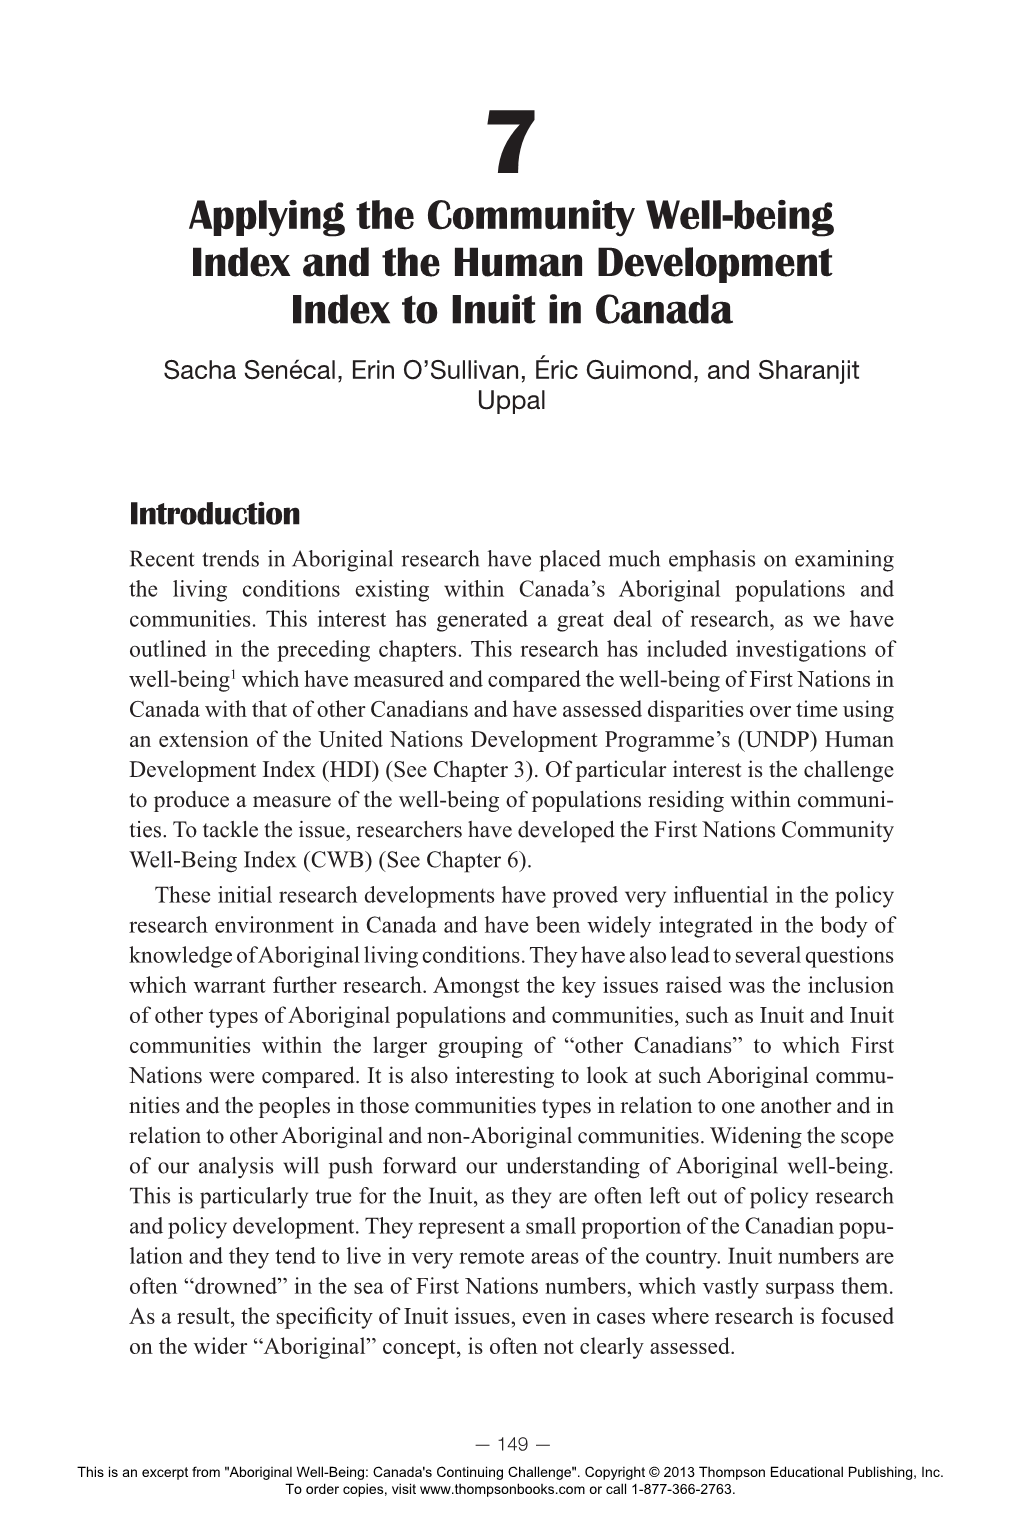 7. Applying the Community Well-Being Index and the Human Development Index to Inuit in Canada